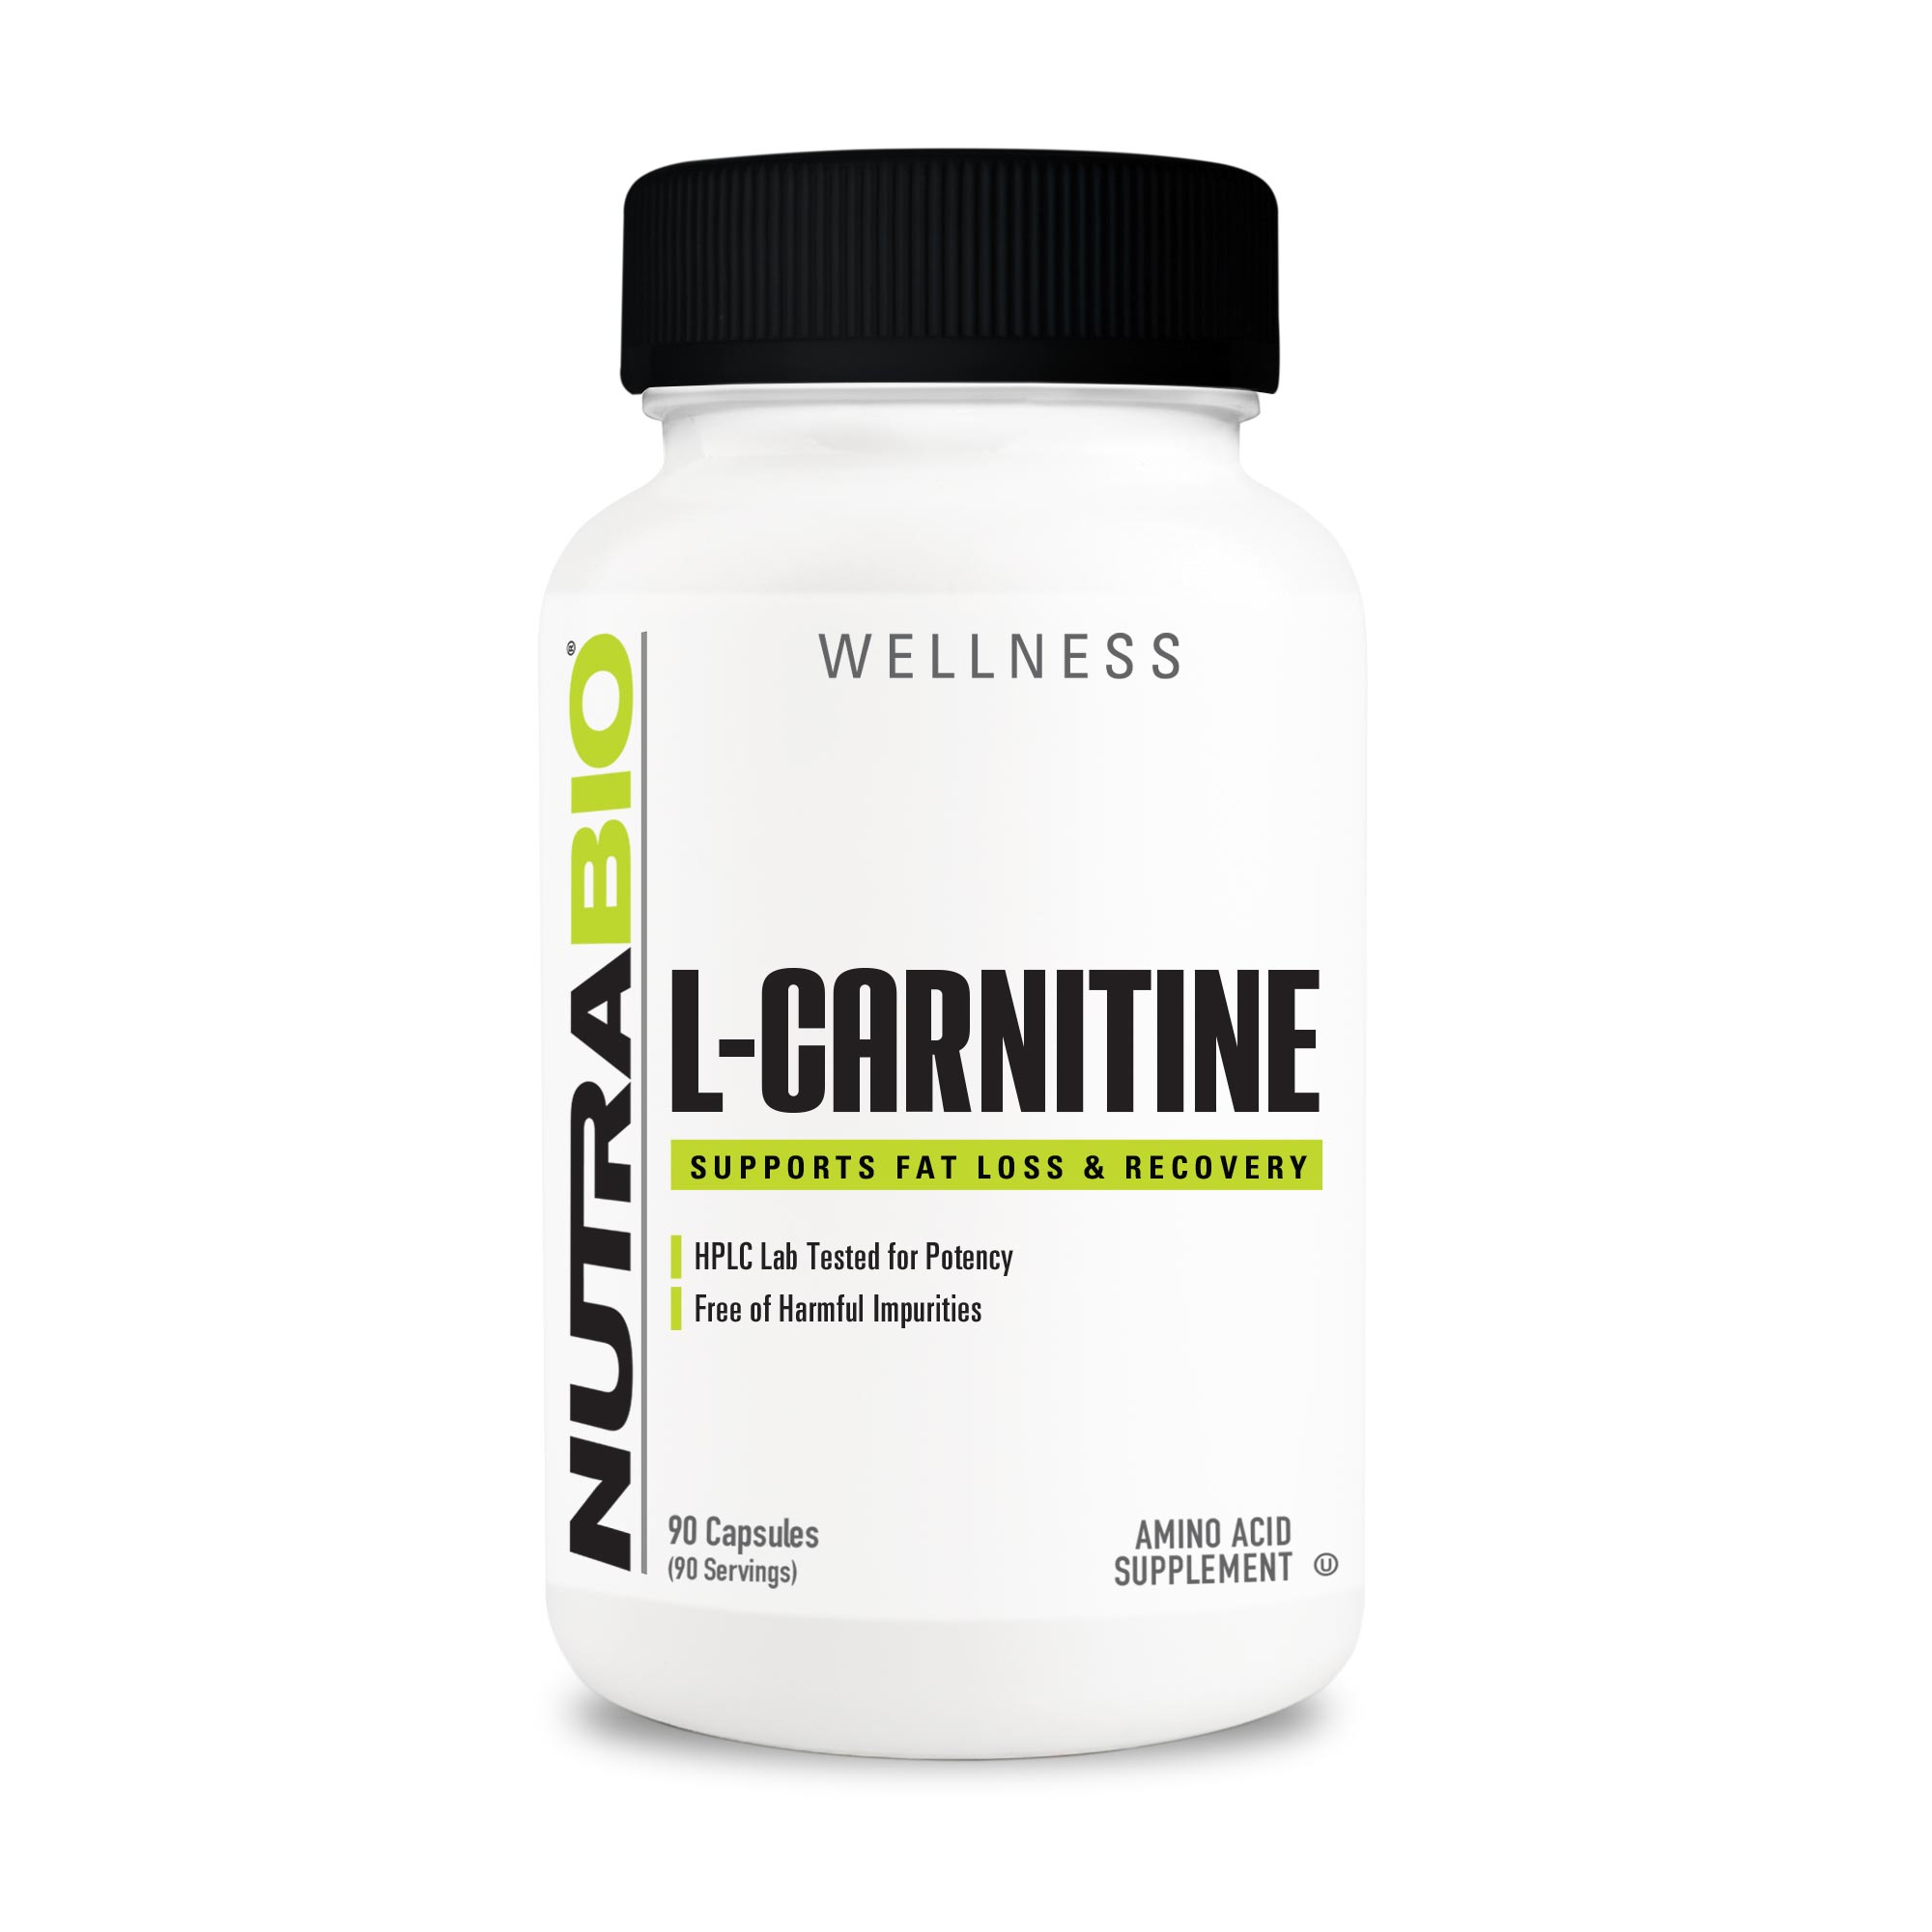 L-carnitine and athletic recovery